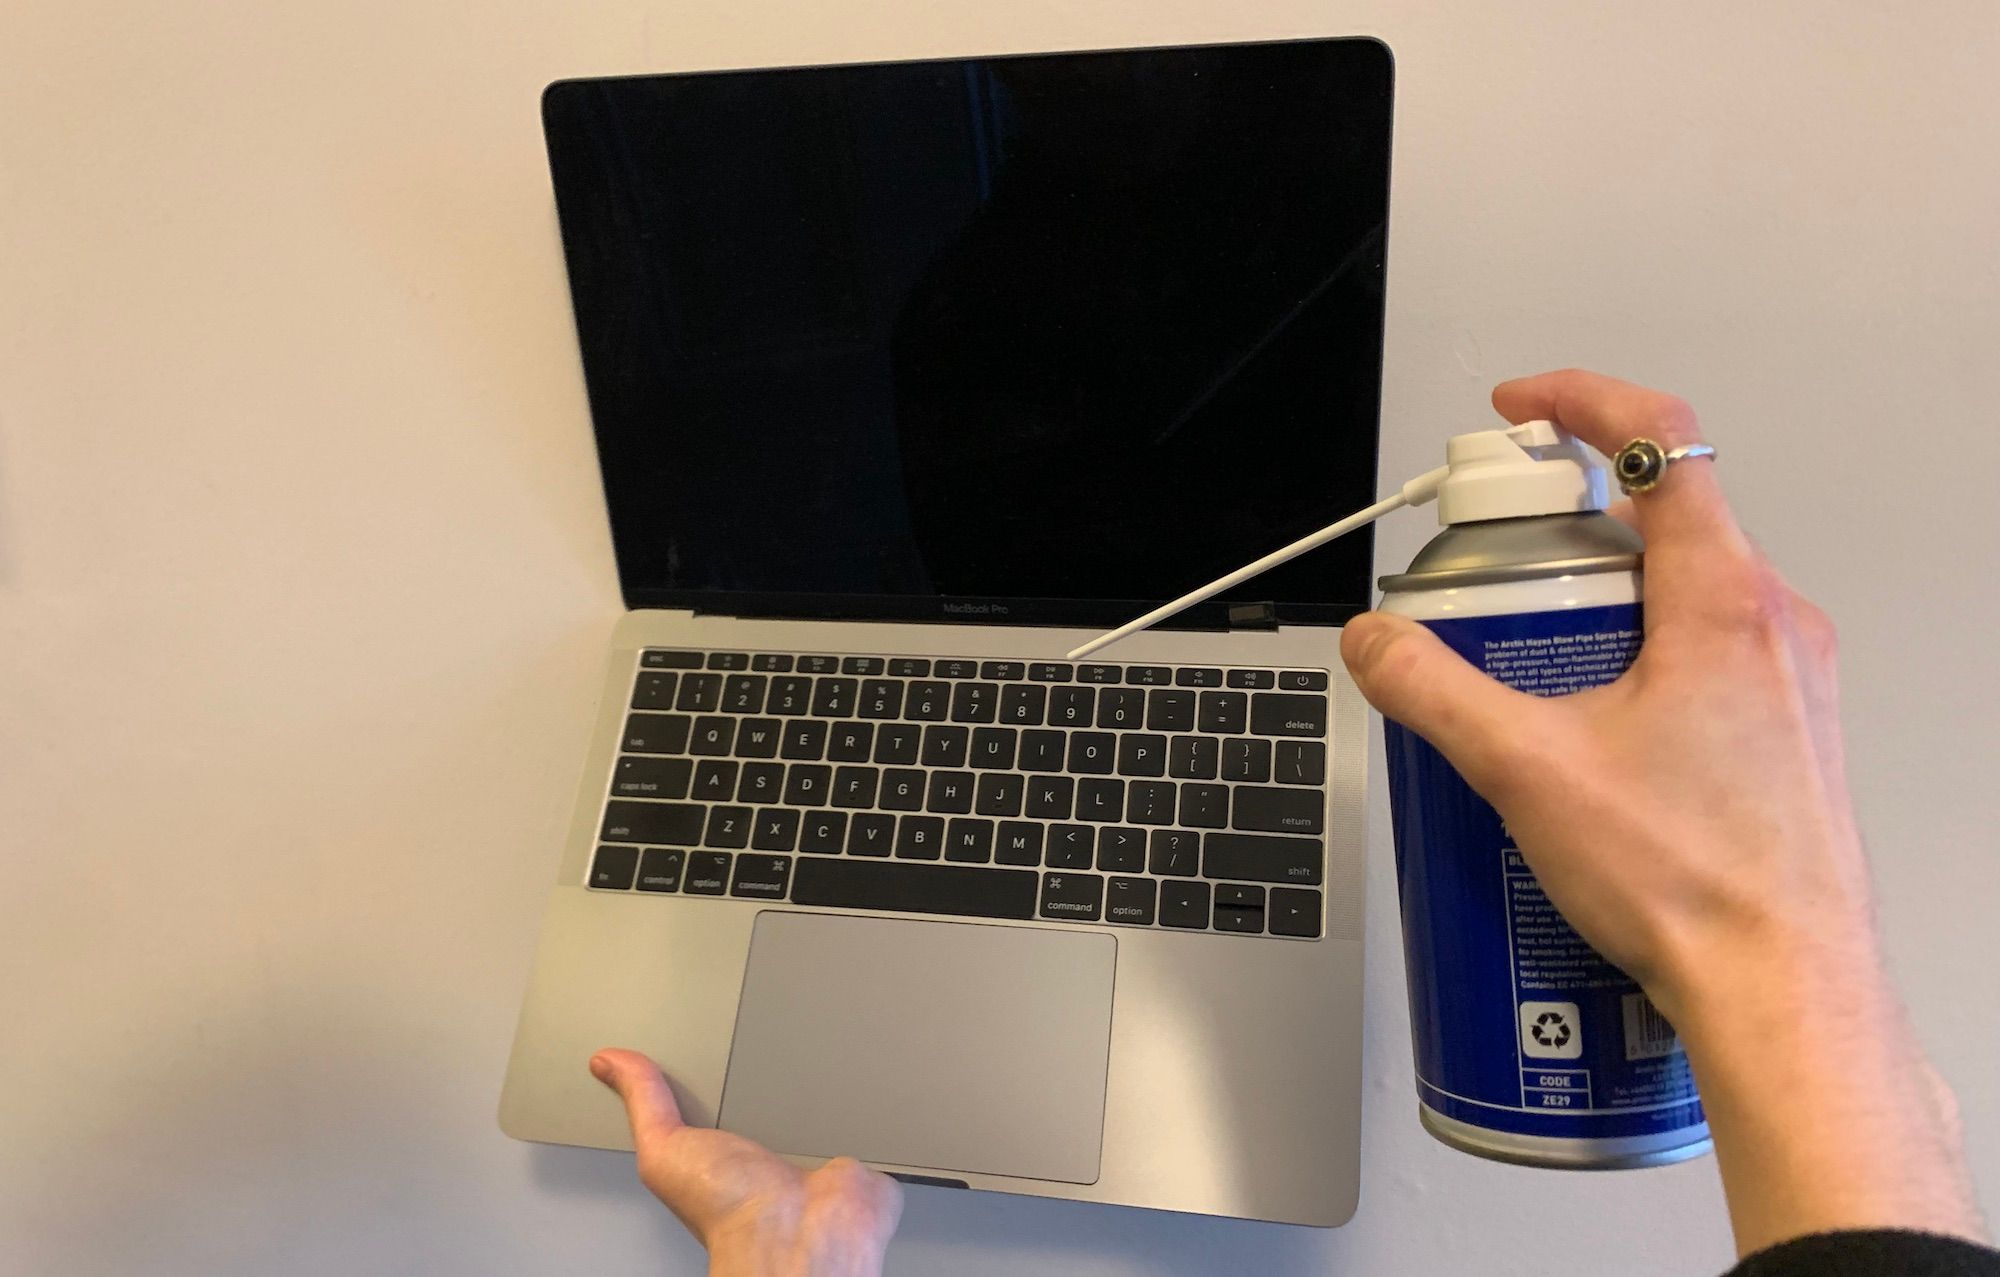 A hand holding a macbook in the air with a hand pointing a compressed air can at the keyboard